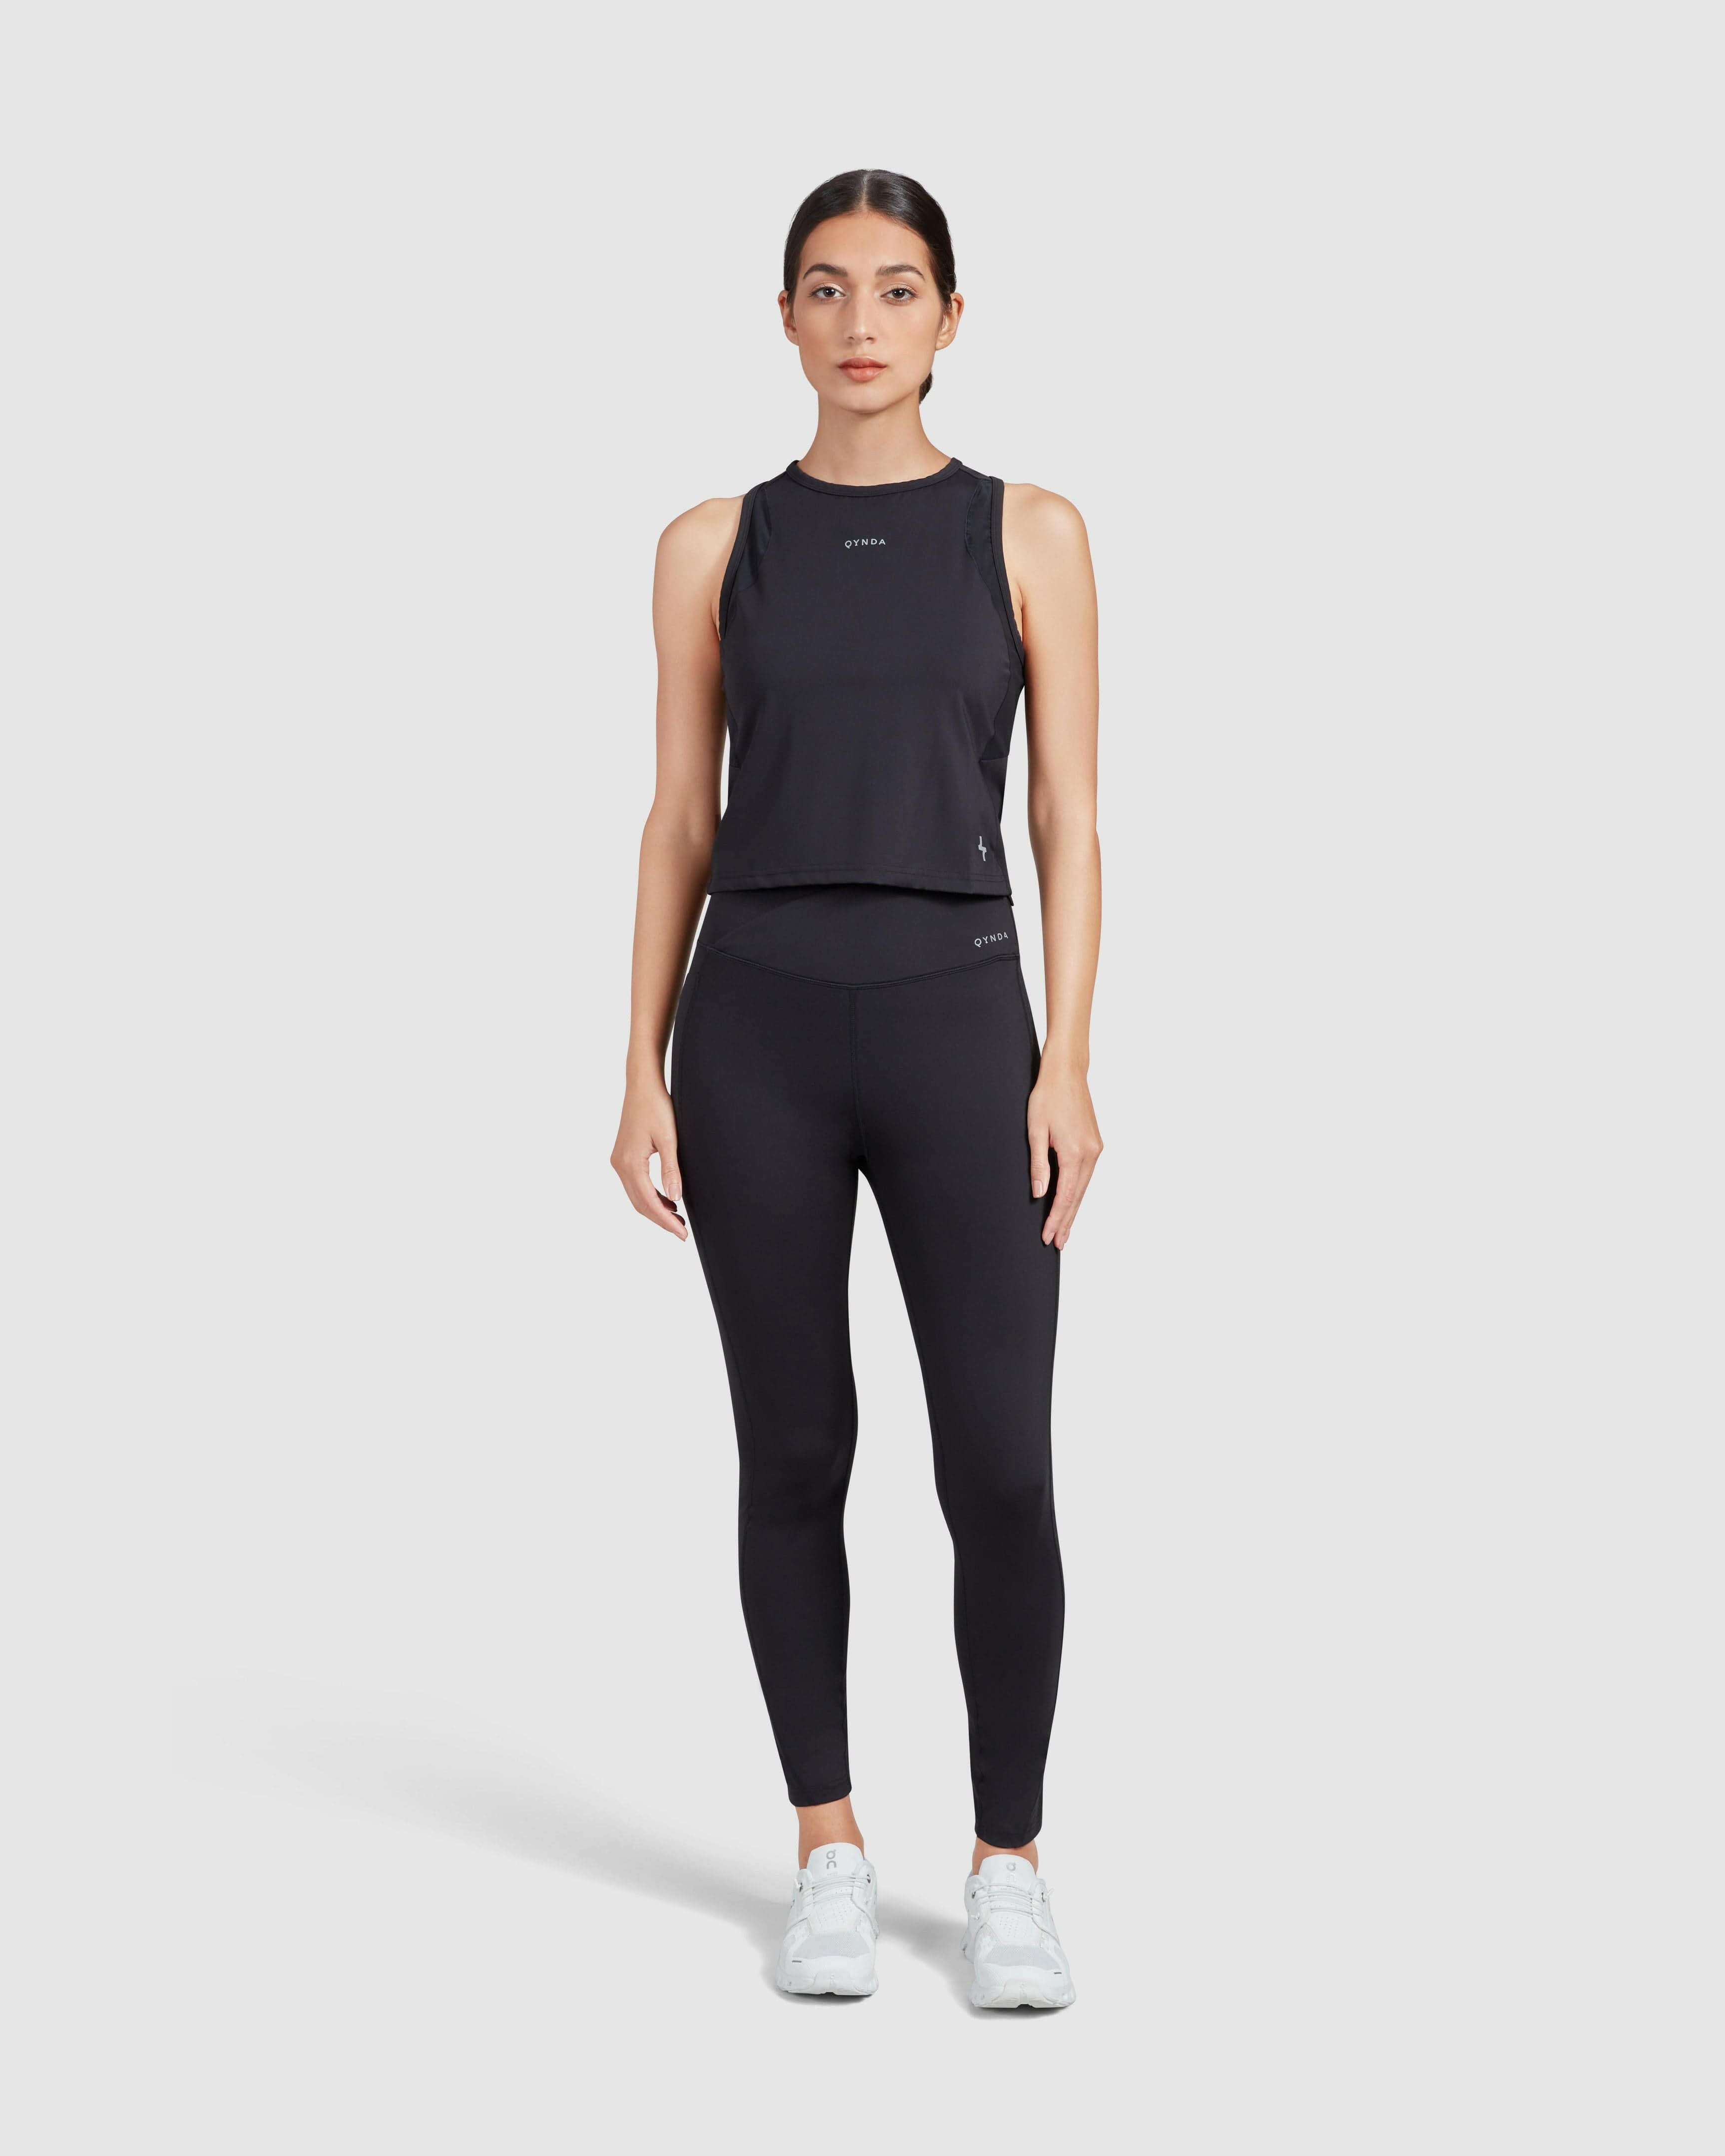 A woman standing confidently, wearing a qynda sporty black low impact gym tank top with a high neckline and leggings, paired with white sneakers, on a plain white background. Ideal for showcasing casual athletic wear.